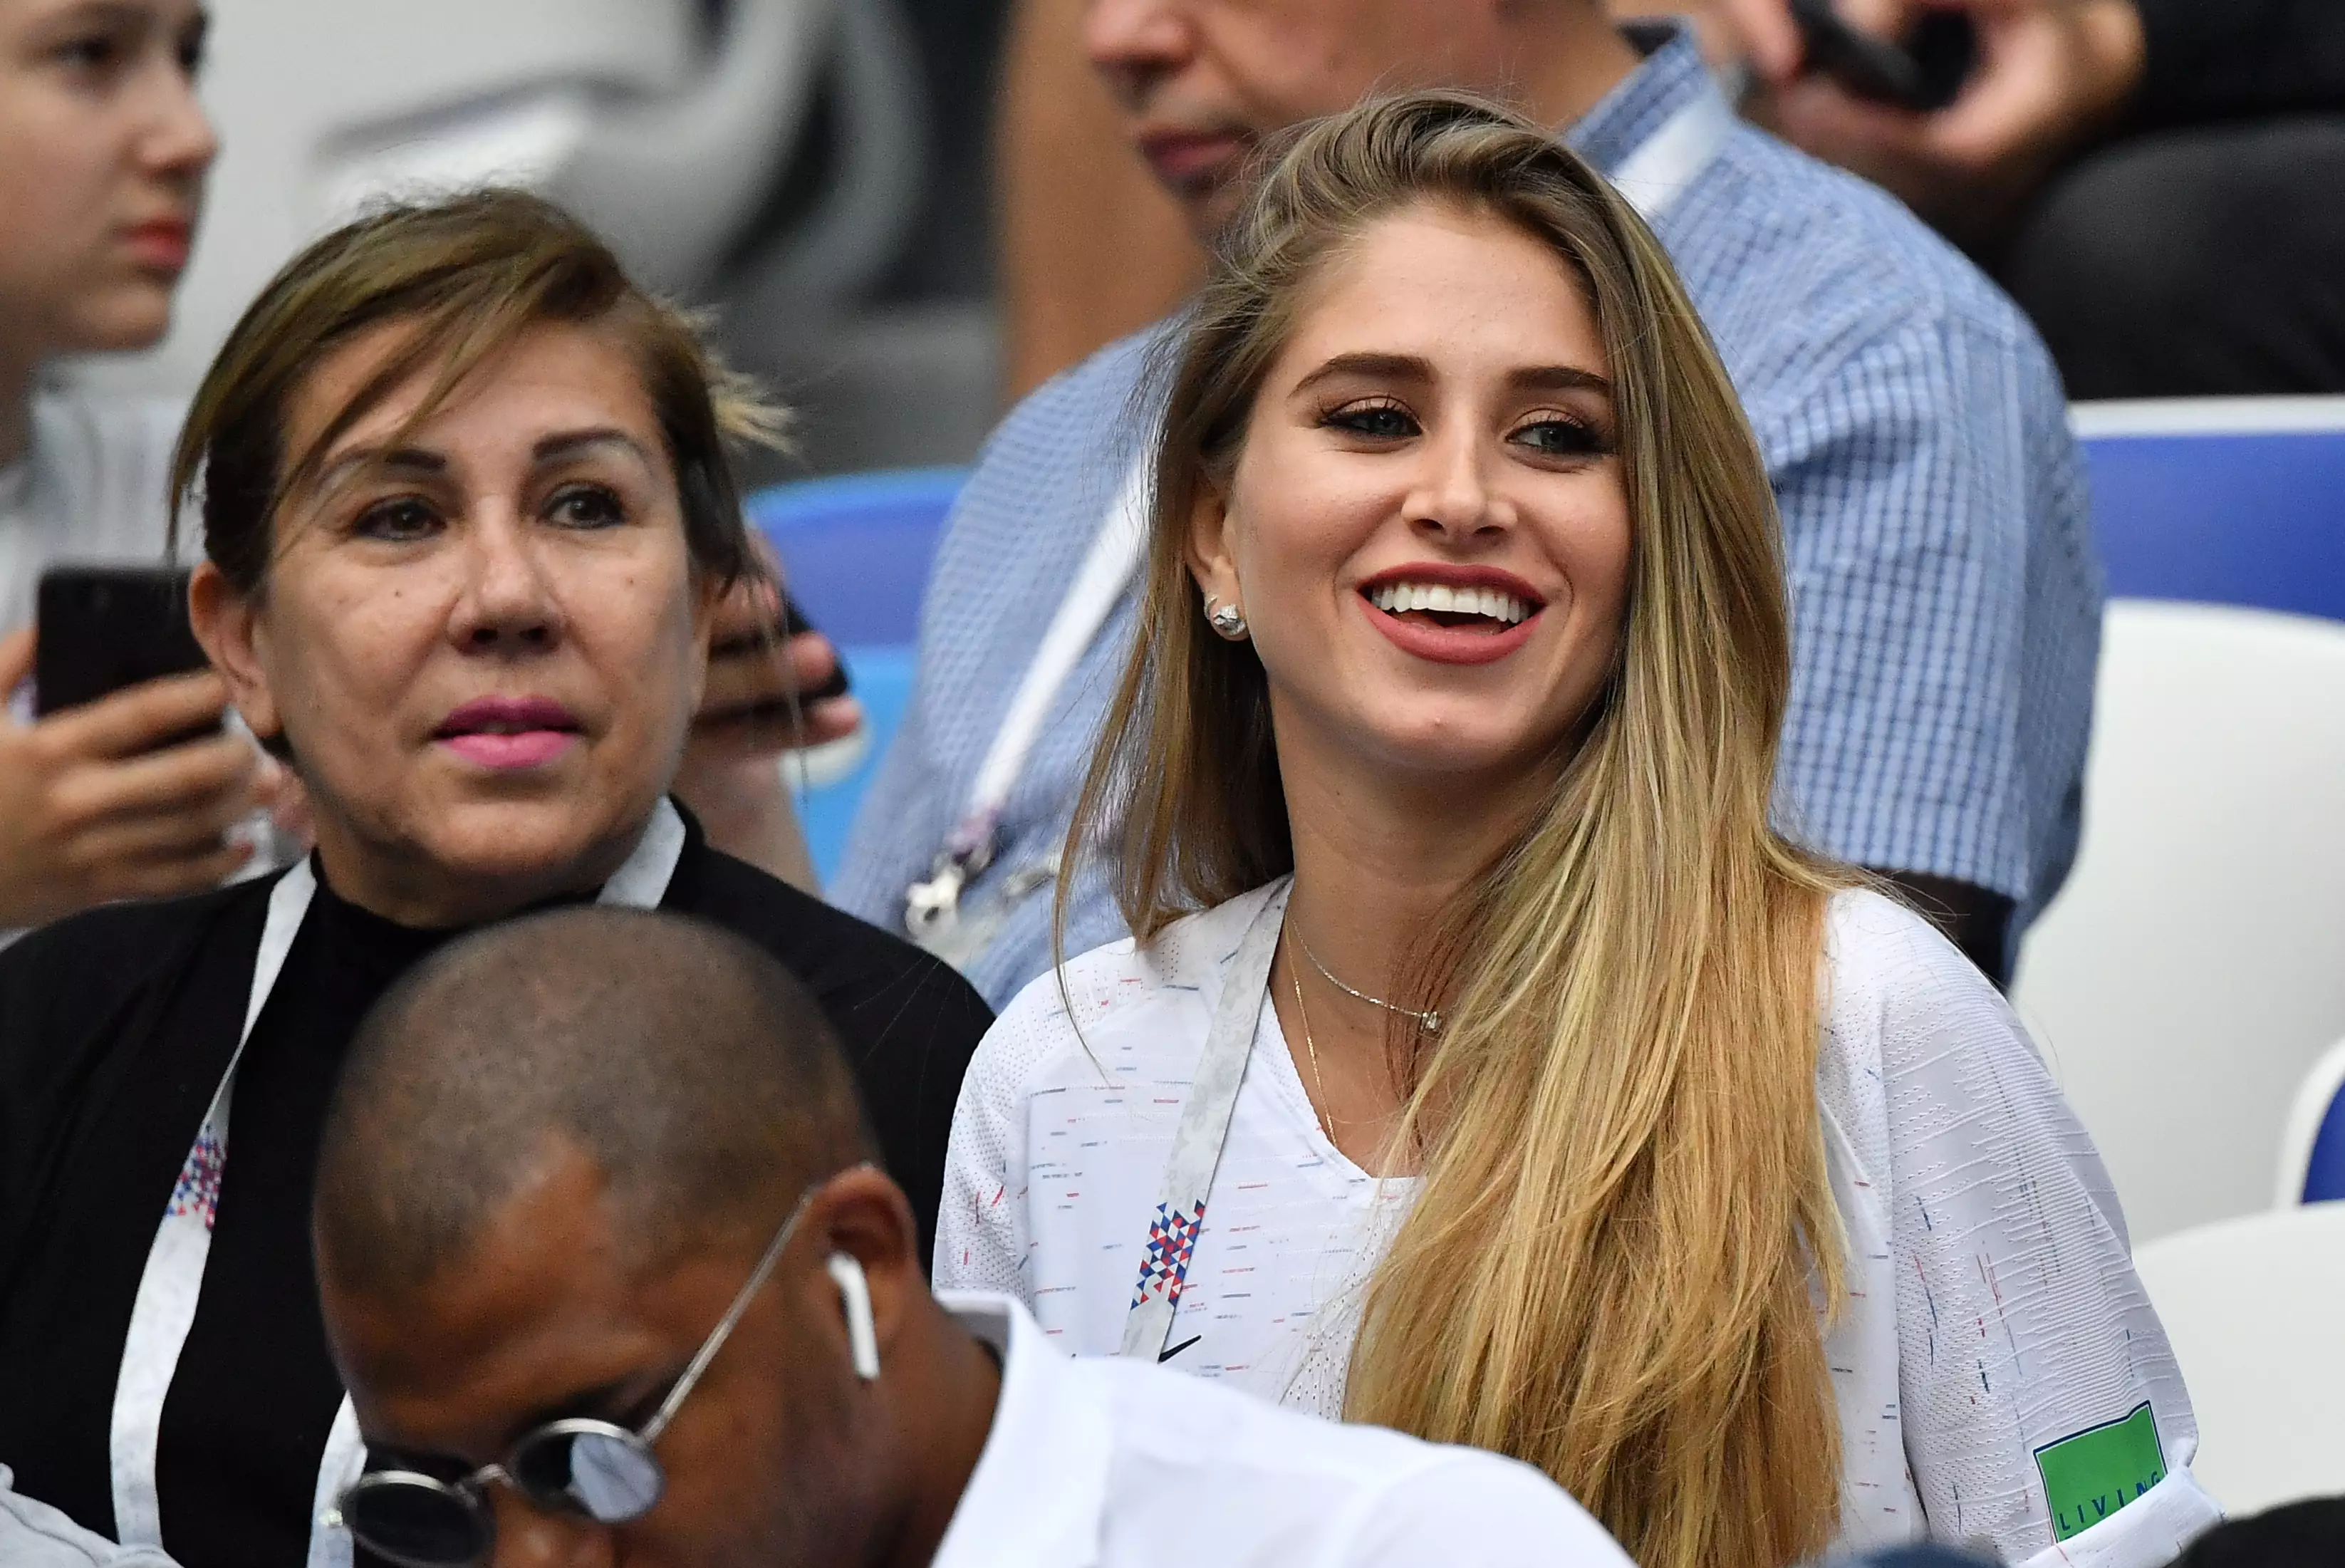 Paul Pogba's Wife Maria Salaues At The FIFA World Cup 2018.